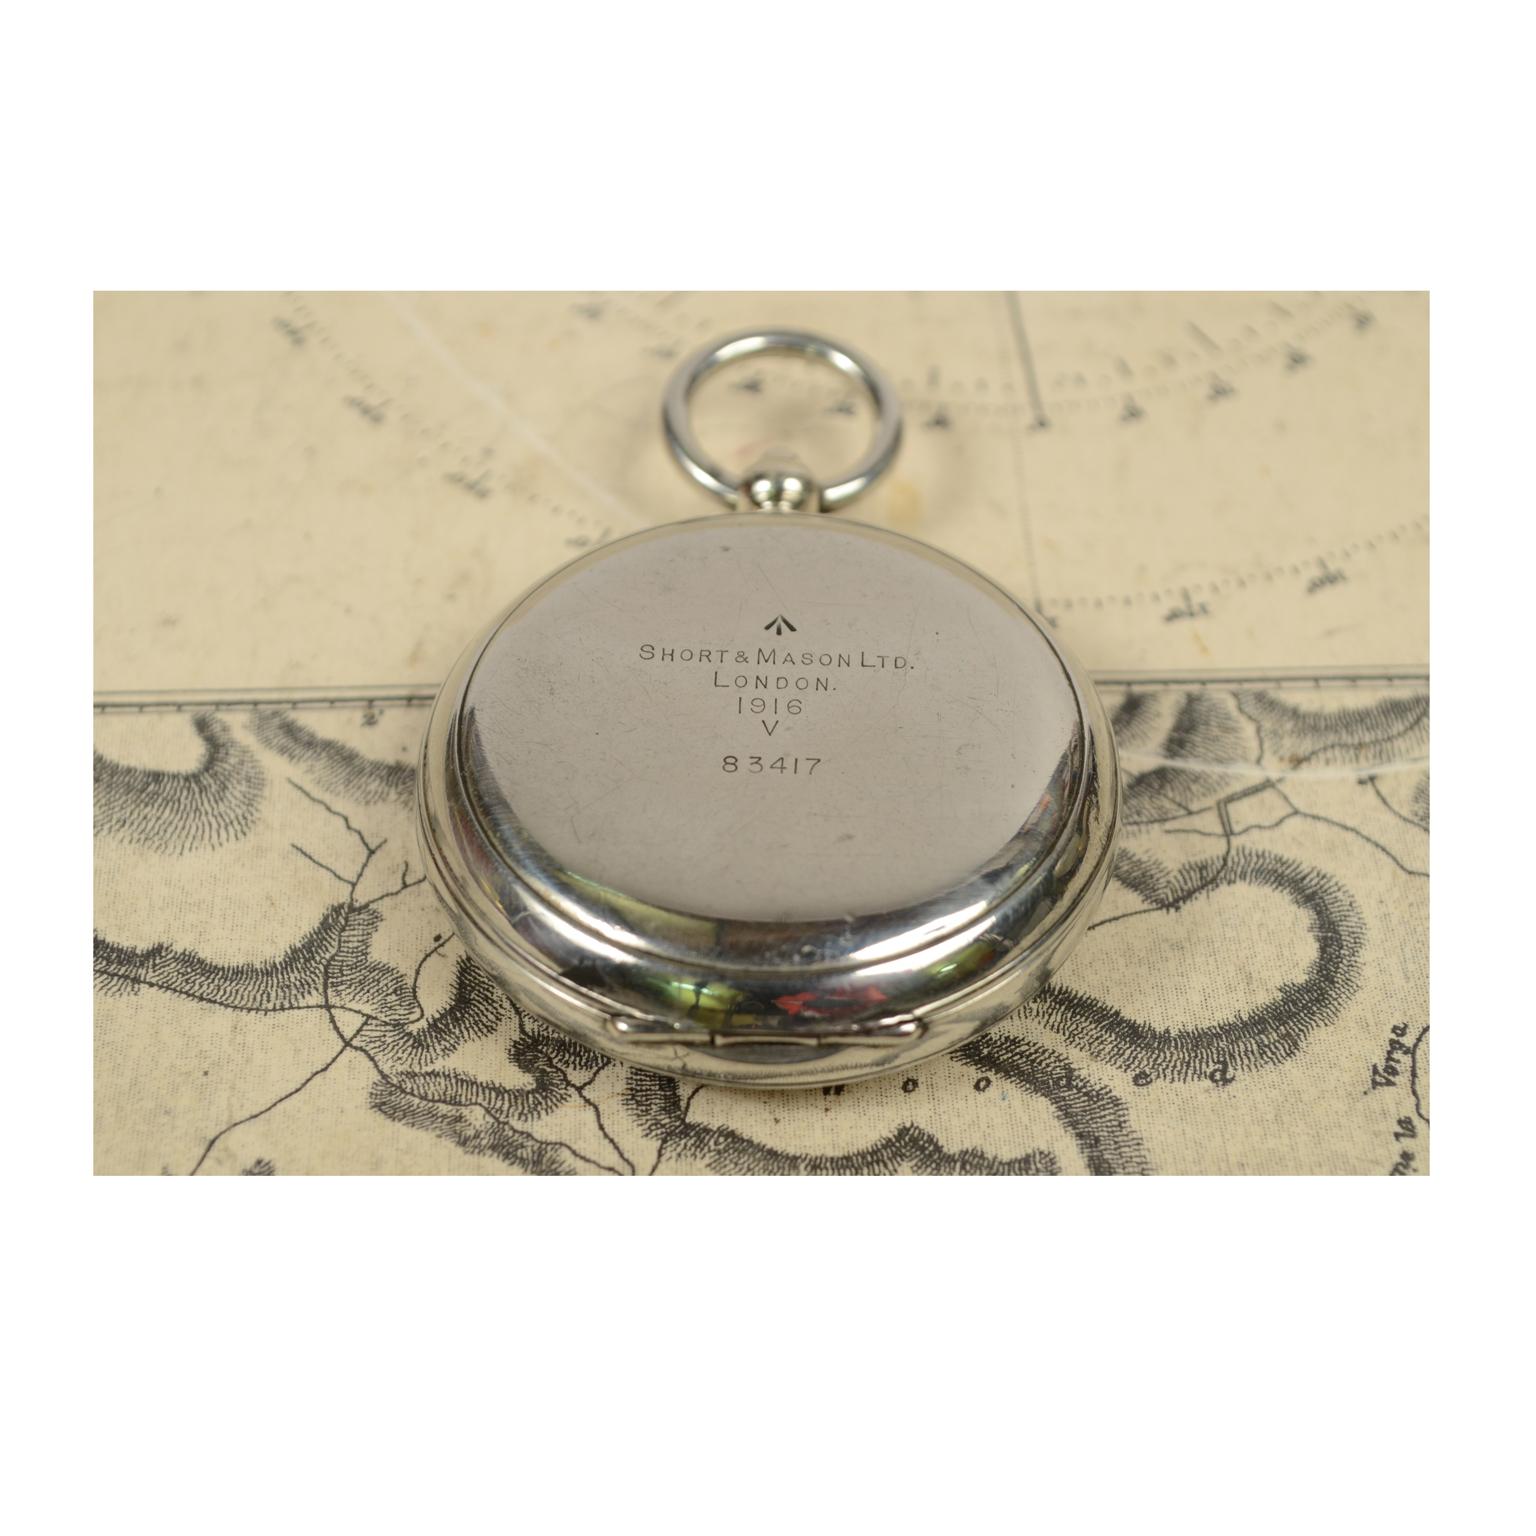 Early 20th Century Pocket Compass Used by the Royal Air Force Officers in 1916